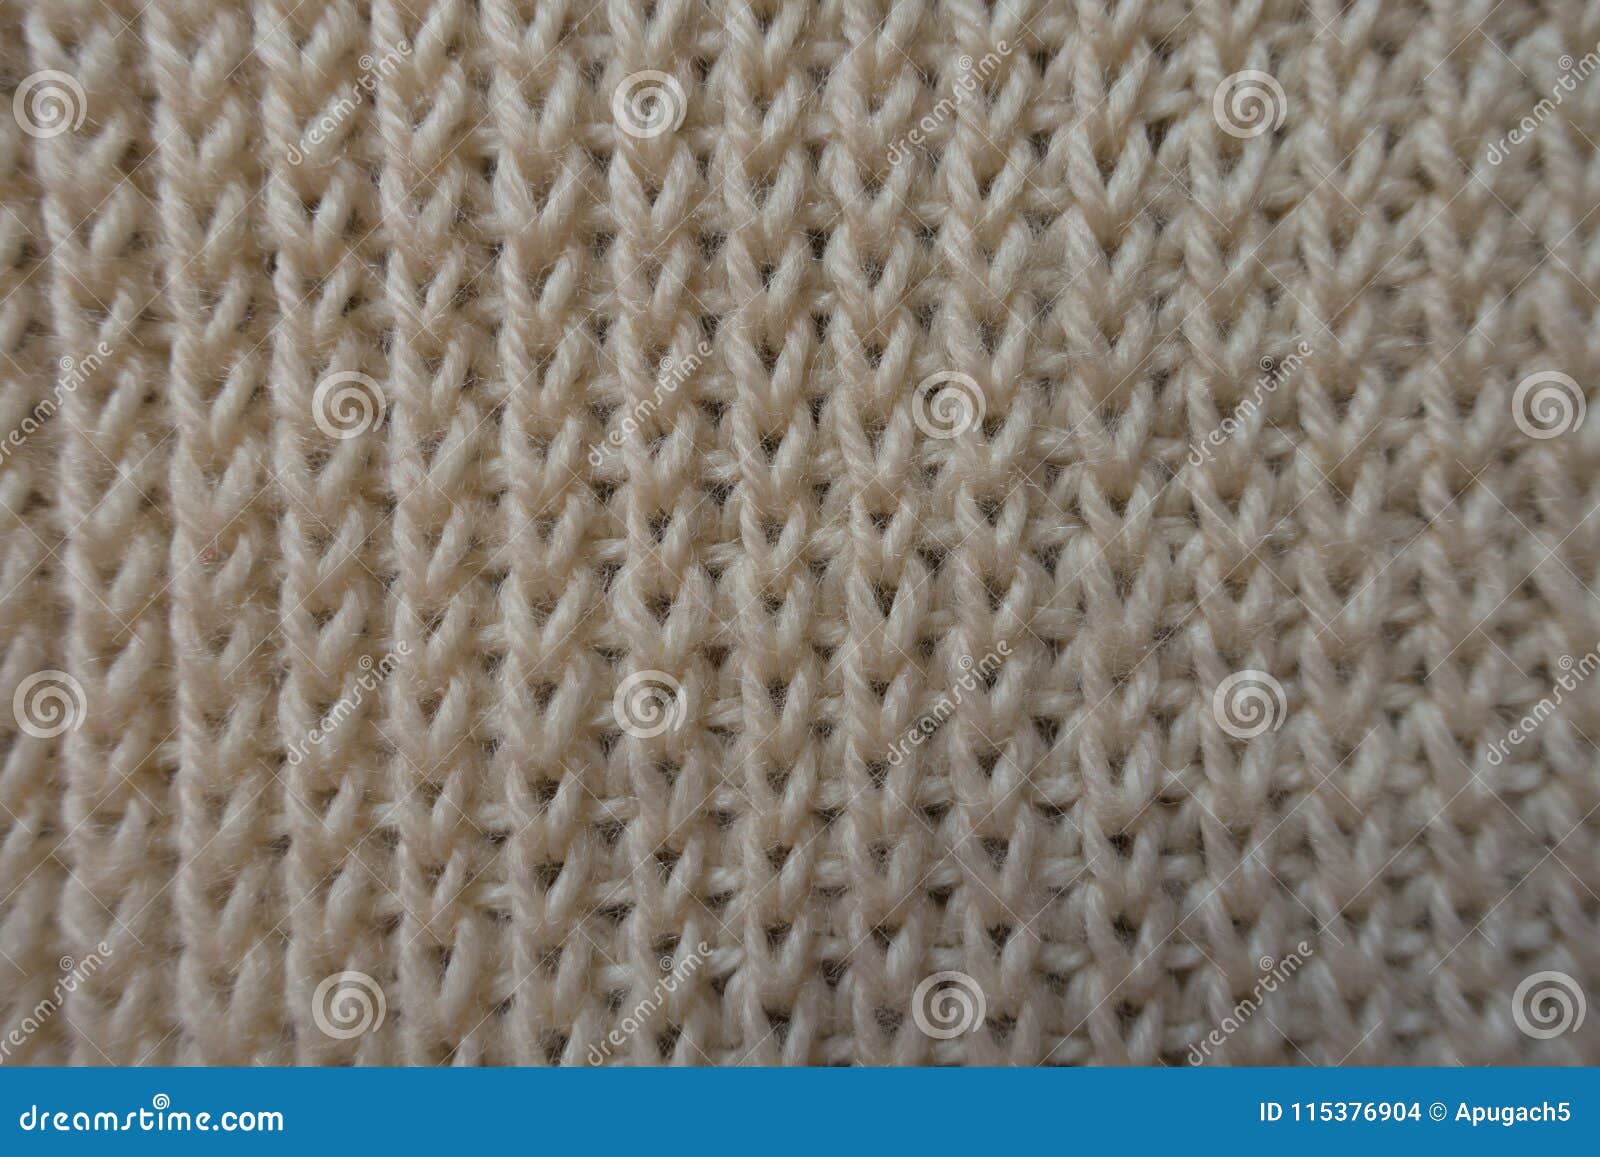 cream knitted fabric from above ribbing pattern